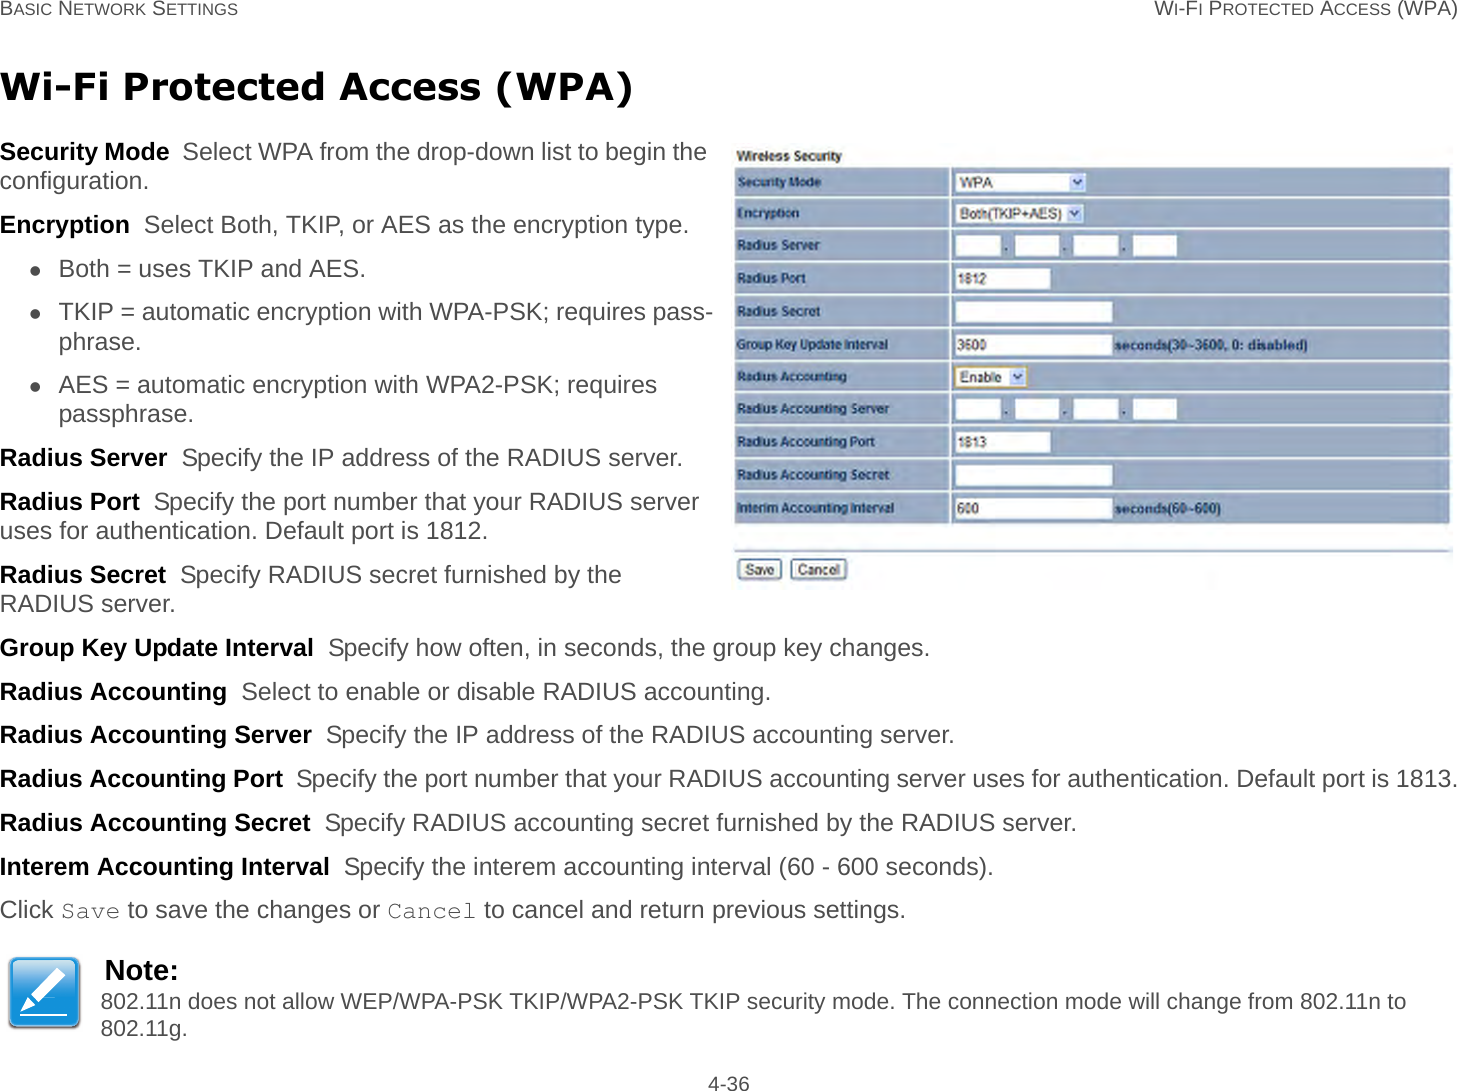 BASIC NETWORK SETTINGS WI-FI PROTECTED ACCESS (WPA) 4-36Wi-Fi Protected Access (WPA)Security Mode  Select WPA from the drop-down list to begin the configuration.Encryption  Select Both, TKIP, or AES as the encryption type.Both = uses TKIP and AES.TKIP = automatic encryption with WPA-PSK; requires pass-phrase.AES = automatic encryption with WPA2-PSK; requires passphrase.Radius Server  Specify the IP address of the RADIUS server.Radius Port  Specify the port number that your RADIUS server uses for authentication. Default port is 1812.Radius Secret  Specify RADIUS secret furnished by the RADIUS server.Group Key Update Interval  Specify how often, in seconds, the group key changes.Radius Accounting  Select to enable or disable RADIUS accounting.Radius Accounting Server  Specify the IP address of the RADIUS accounting server.Radius Accounting Port  Specify the port number that your RADIUS accounting server uses for authentication. Default port is 1813.Radius Accounting Secret  Specify RADIUS accounting secret furnished by the RADIUS server.Interem Accounting Interval  Specify the interem accounting interval (60 - 600 seconds).Click Save to save the changes or Cancel to cancel and return previous settings.Note:802.11n does not allow WEP/WPA-PSK TKIP/WPA2-PSK TKIP security mode. The connection mode will change from 802.11n to 802.11g.